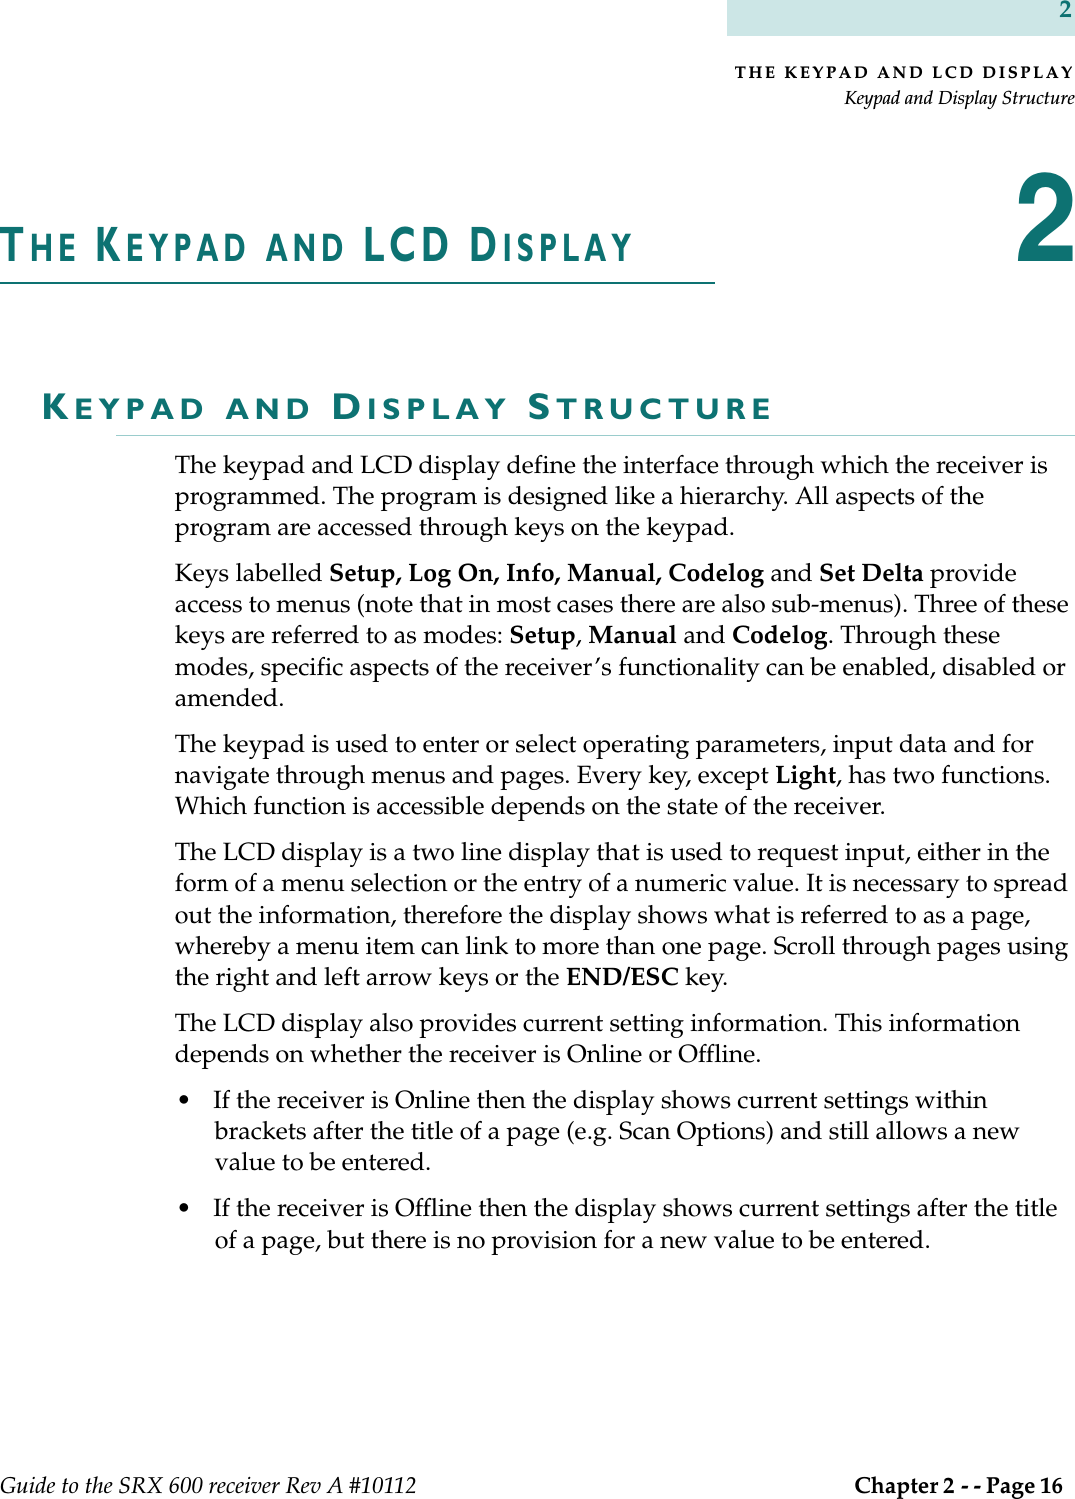 THE KEYPAD AND LCD DISPLAYKeypad and Display StructureGuide to the SRX 600 receiver Rev A #10112  Chapter 2 - - Page 16 2THE KEYPAD AND LCD DISPLAY2KEYPAD AND DISPLAY STRUCTUREThe keypad and LCD display define the interface through which the receiver is programmed. The program is designed like a hierarchy. All aspects of the program are accessed through keys on the keypad. Keys labelled Setup, Log On, Info, Manual, Codelog and Set Delta provide access to menus (note that in most cases there are also sub-menus). Three of these keys are referred to as modes: Setup, Manual and Codelog. Through these modes, specific aspects of the receiver’s functionality can be enabled, disabled or amended. The keypad is used to enter or select operating parameters, input data and for navigate through menus and pages. Every key, except Light, has two functions. Which function is accessible depends on the state of the receiver.The LCD display is a two line display that is used to request input, either in the form of a menu selection or the entry of a numeric value. It is necessary to spread out the information, therefore the display shows what is referred to as a page, whereby a menu item can link to more than one page. Scroll through pages using the right and left arrow keys or the END/ESC key. The LCD display also provides current setting information. This information depends on whether the receiver is Online or Offline. • If the receiver is Online then the display shows current settings within brackets after the title of a page (e.g. Scan Options) and still allows a new value to be entered. • If the receiver is Offline then the display shows current settings after the title of a page, but there is no provision for a new value to be entered. 